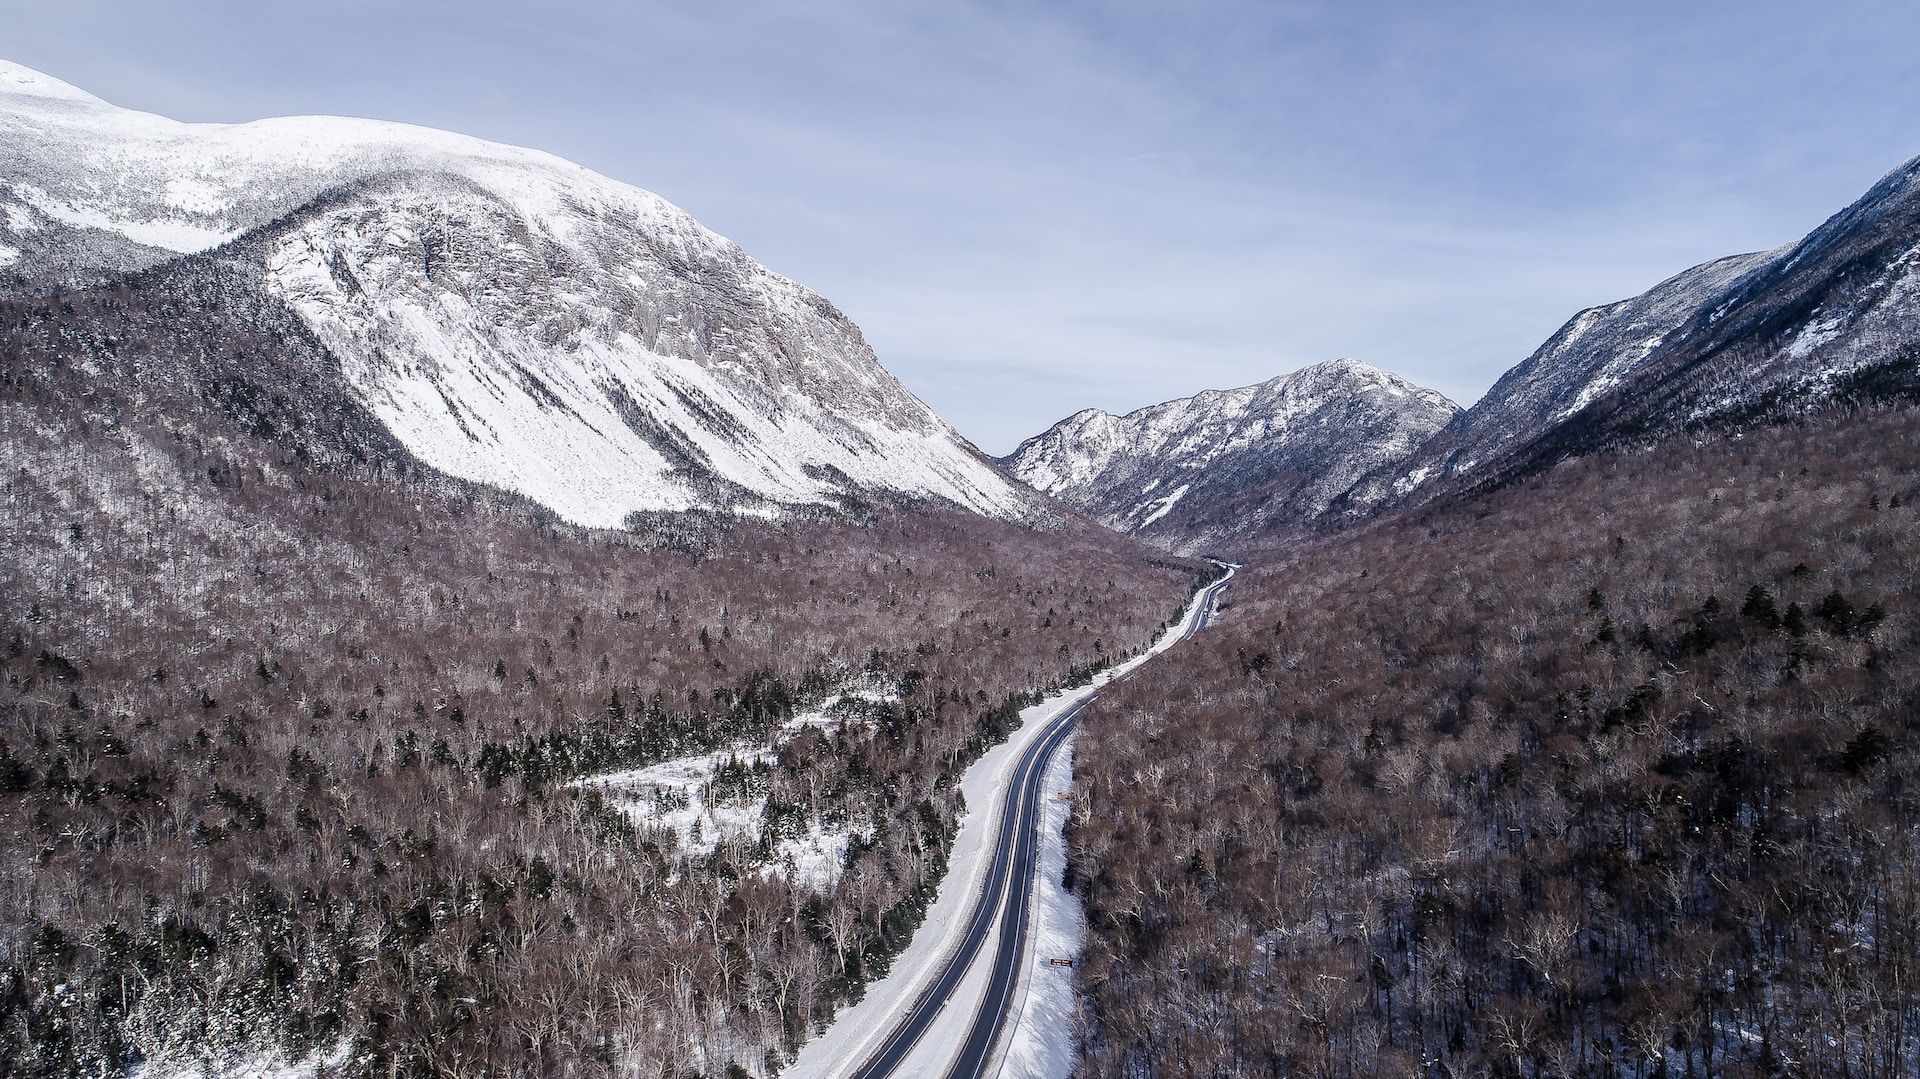 The snowy mountain area in and around Franconia Notch on a sunny winter's day, White Mountains, New Hampshire, USA